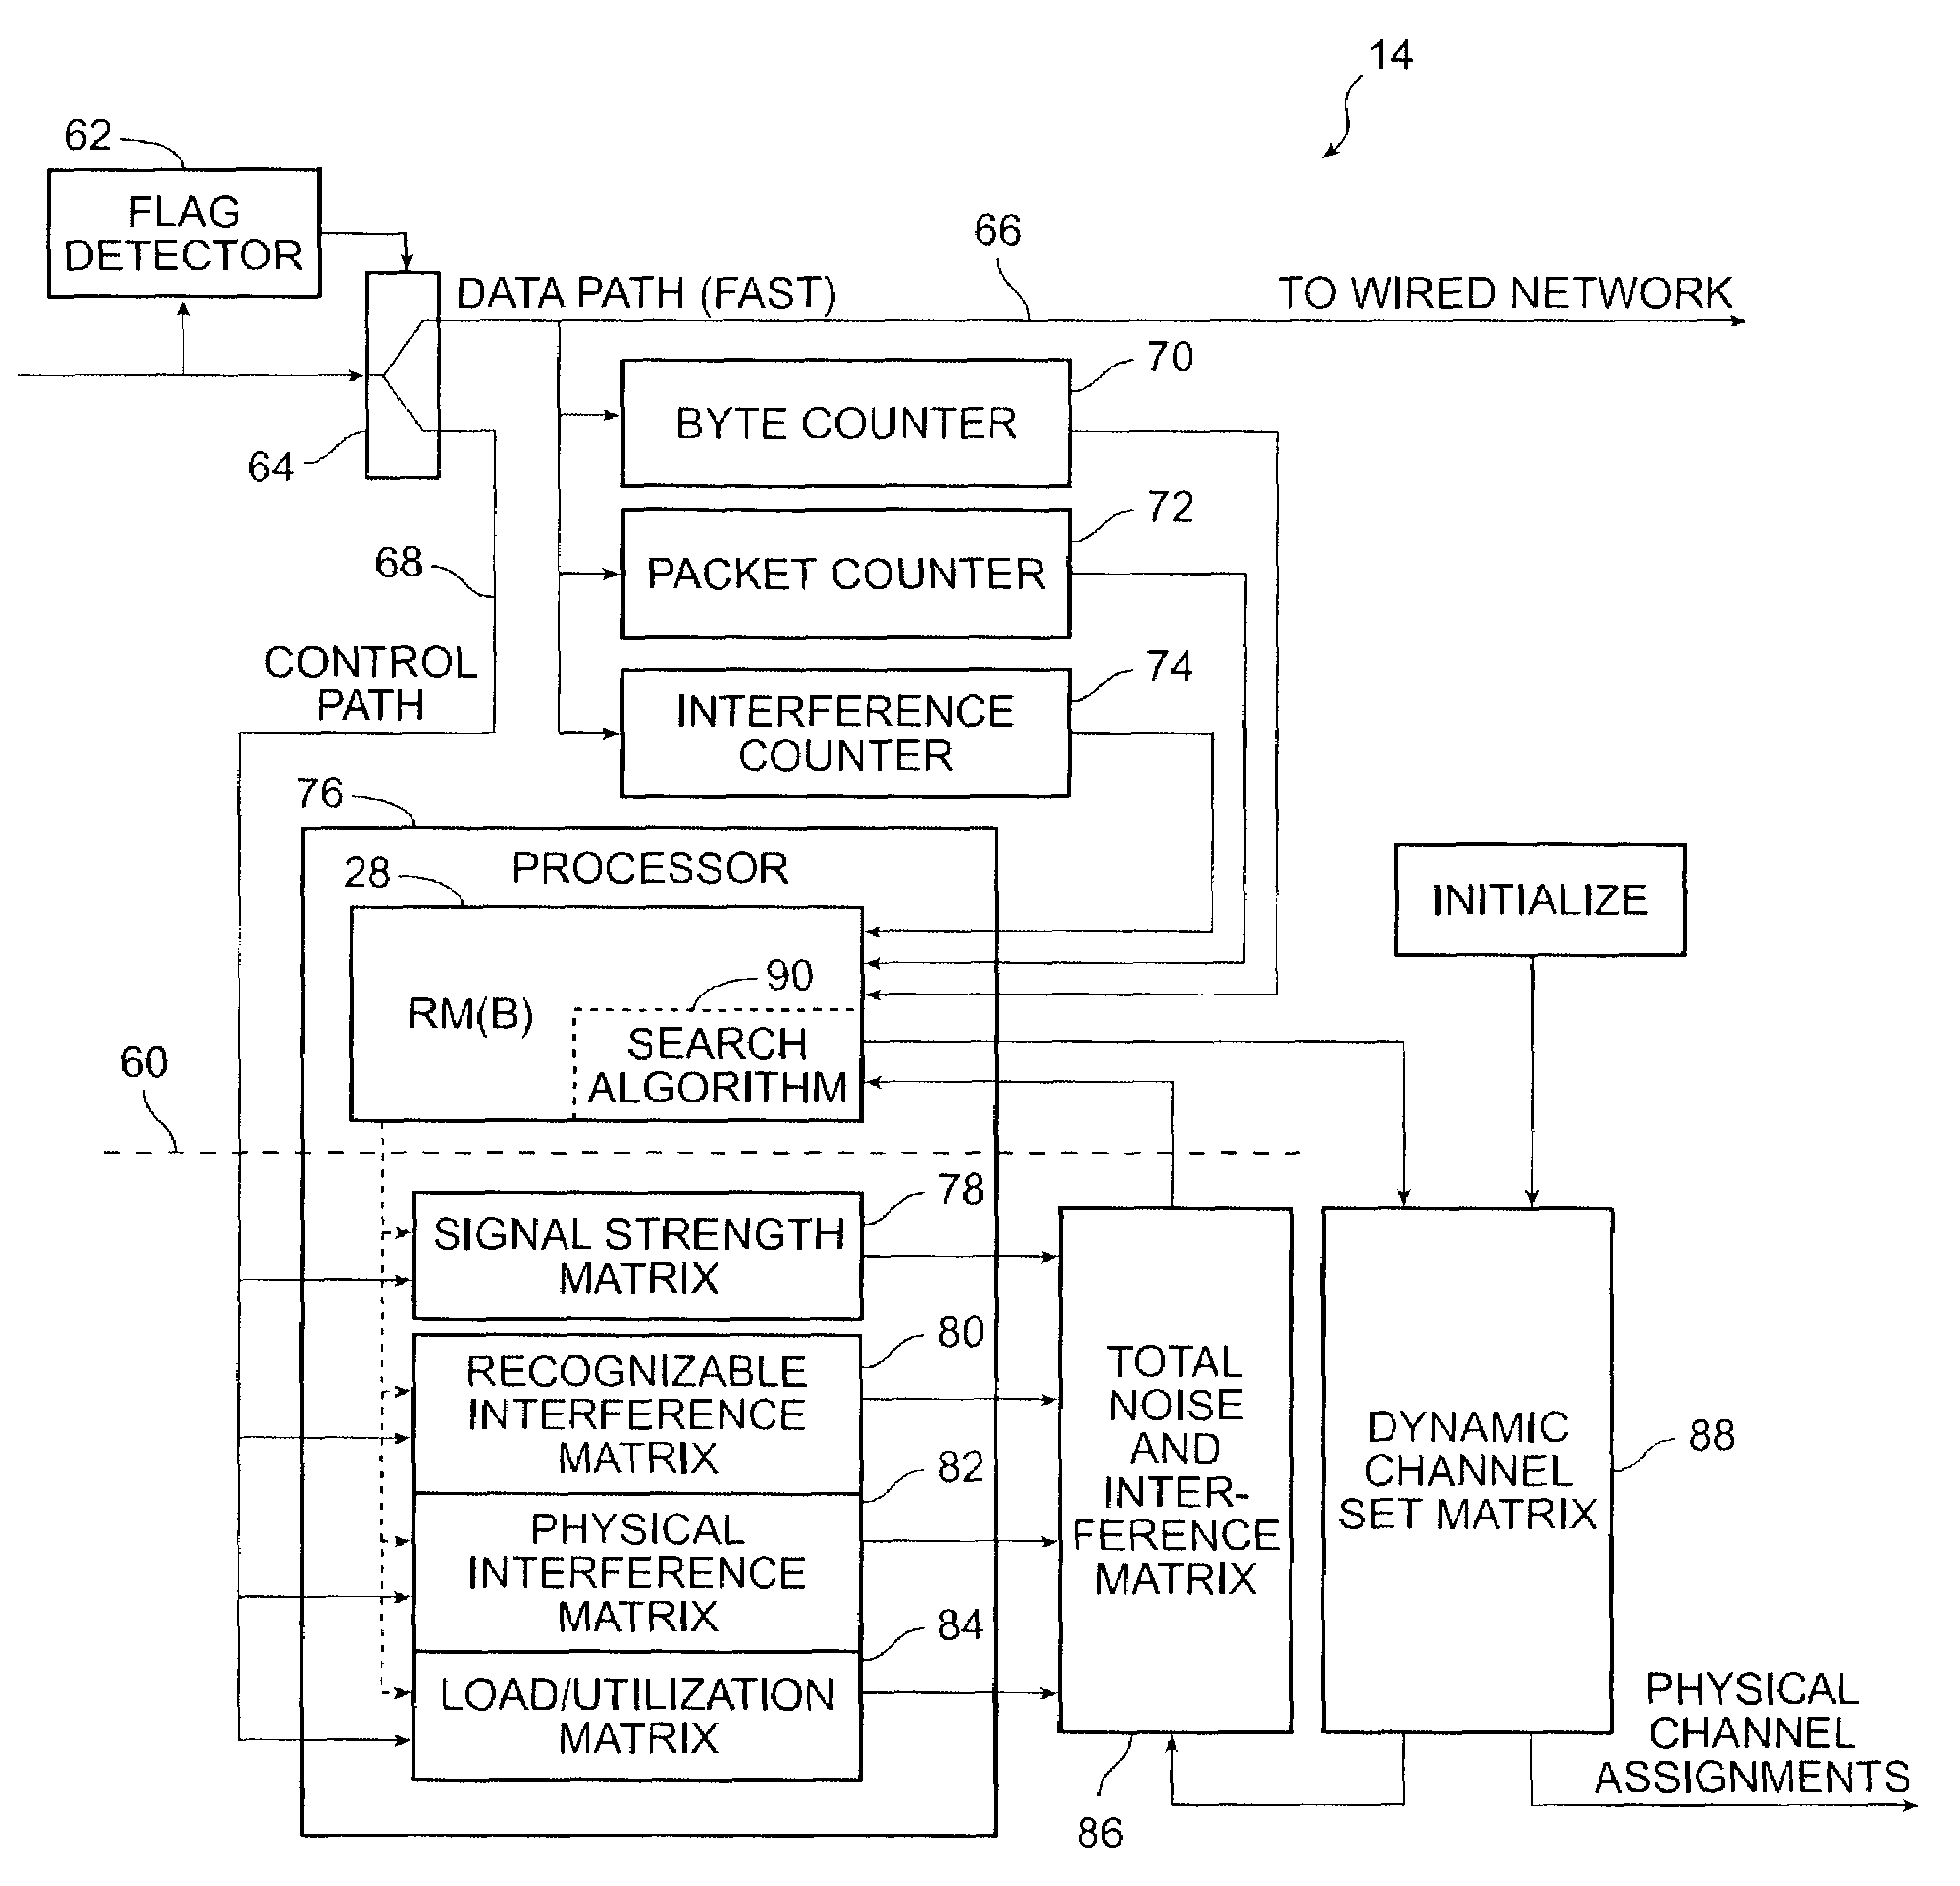 Method and system for dynamically assigning channels across multiple radios in a wireless LAN